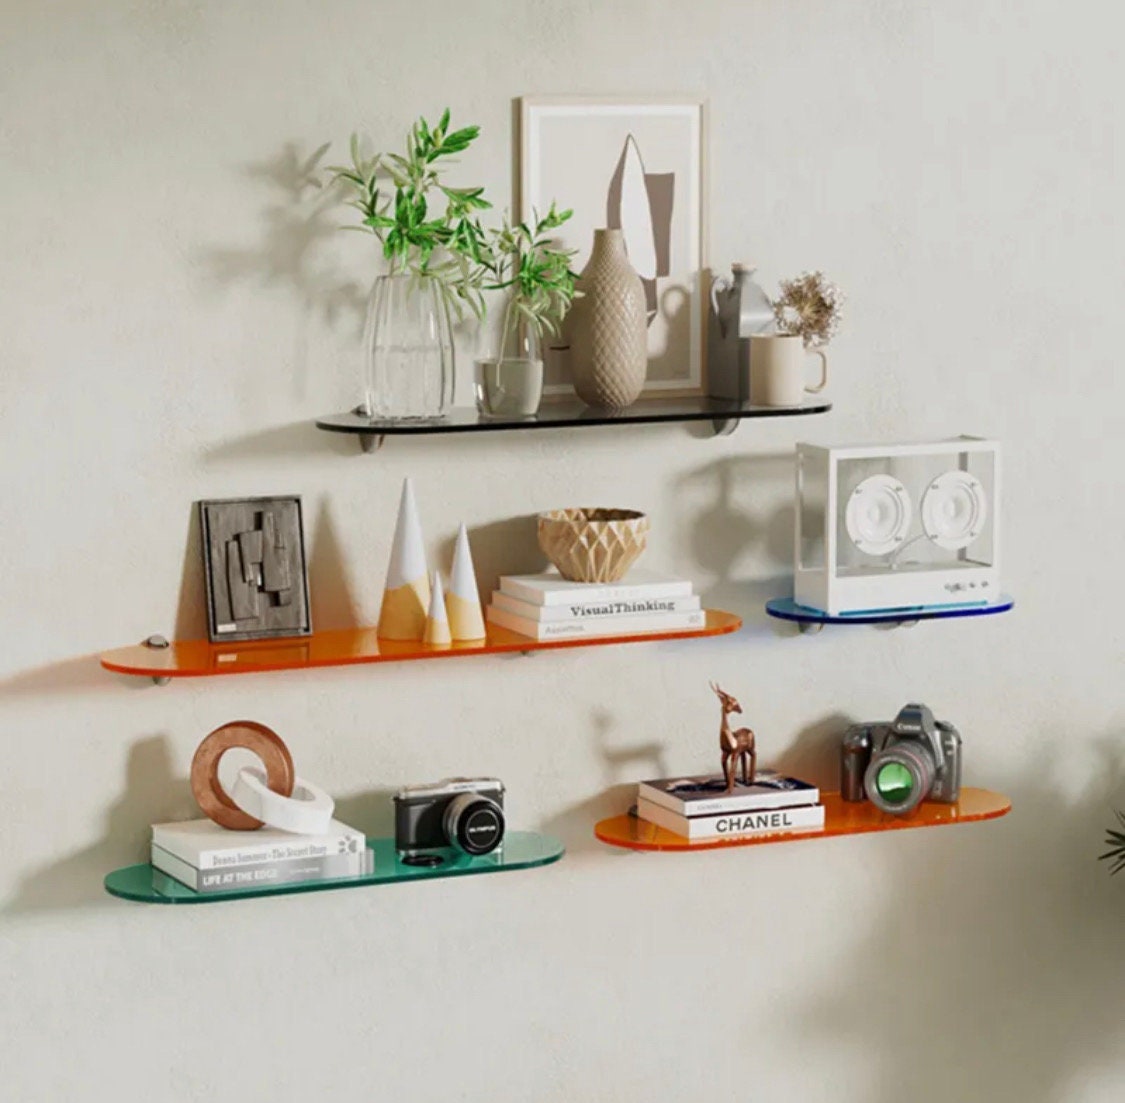 6 Pieces Small Adhesive Wall Shelves, 4 in Clear Floating Shelves